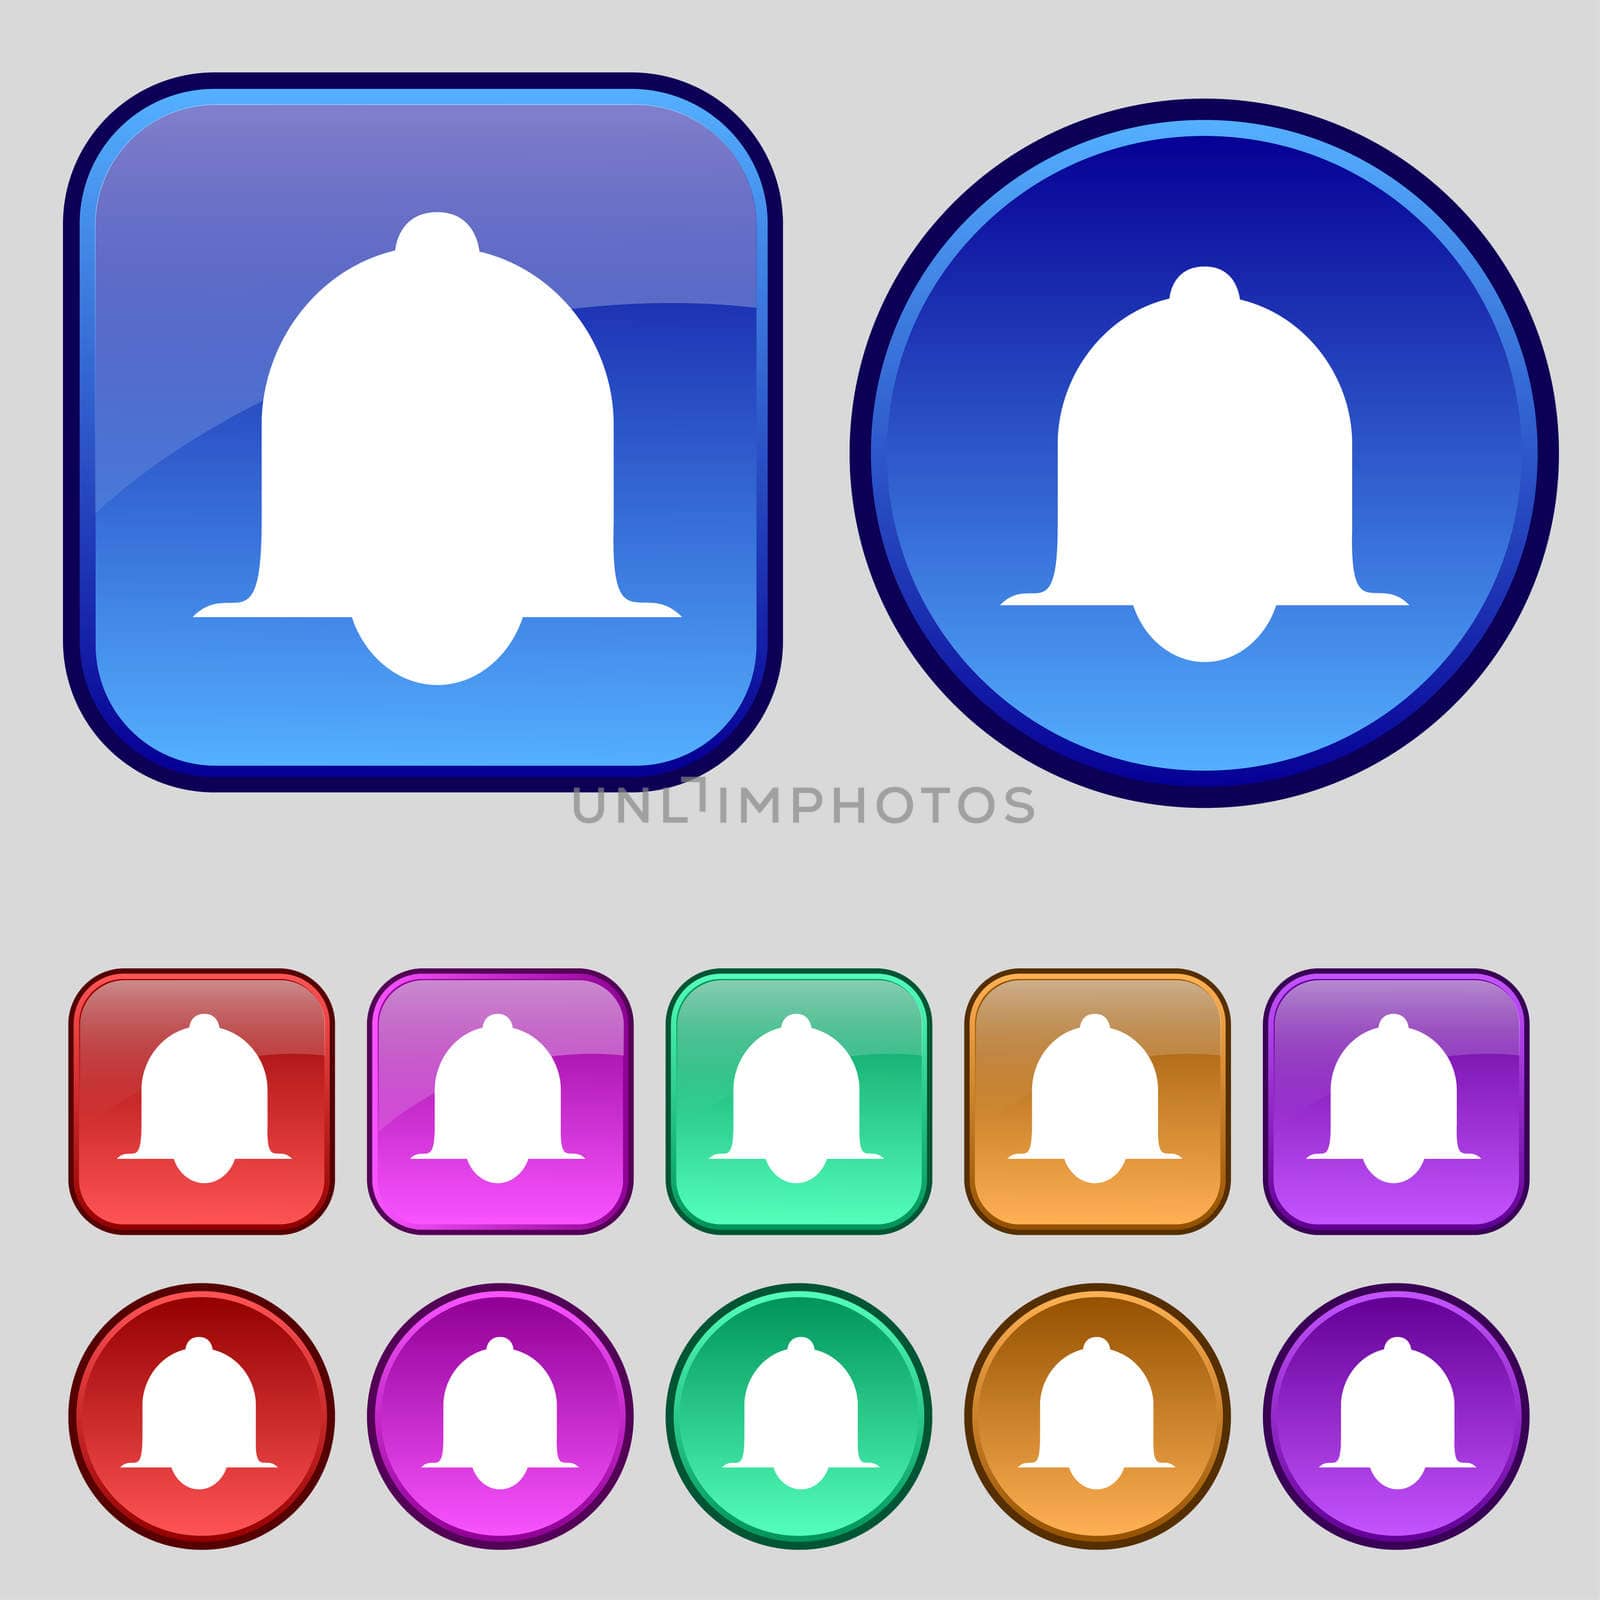 Alarm bell sign icon. Wake up alarm symbol. Speech bubbles information icons. Set of colourful buttons illustration